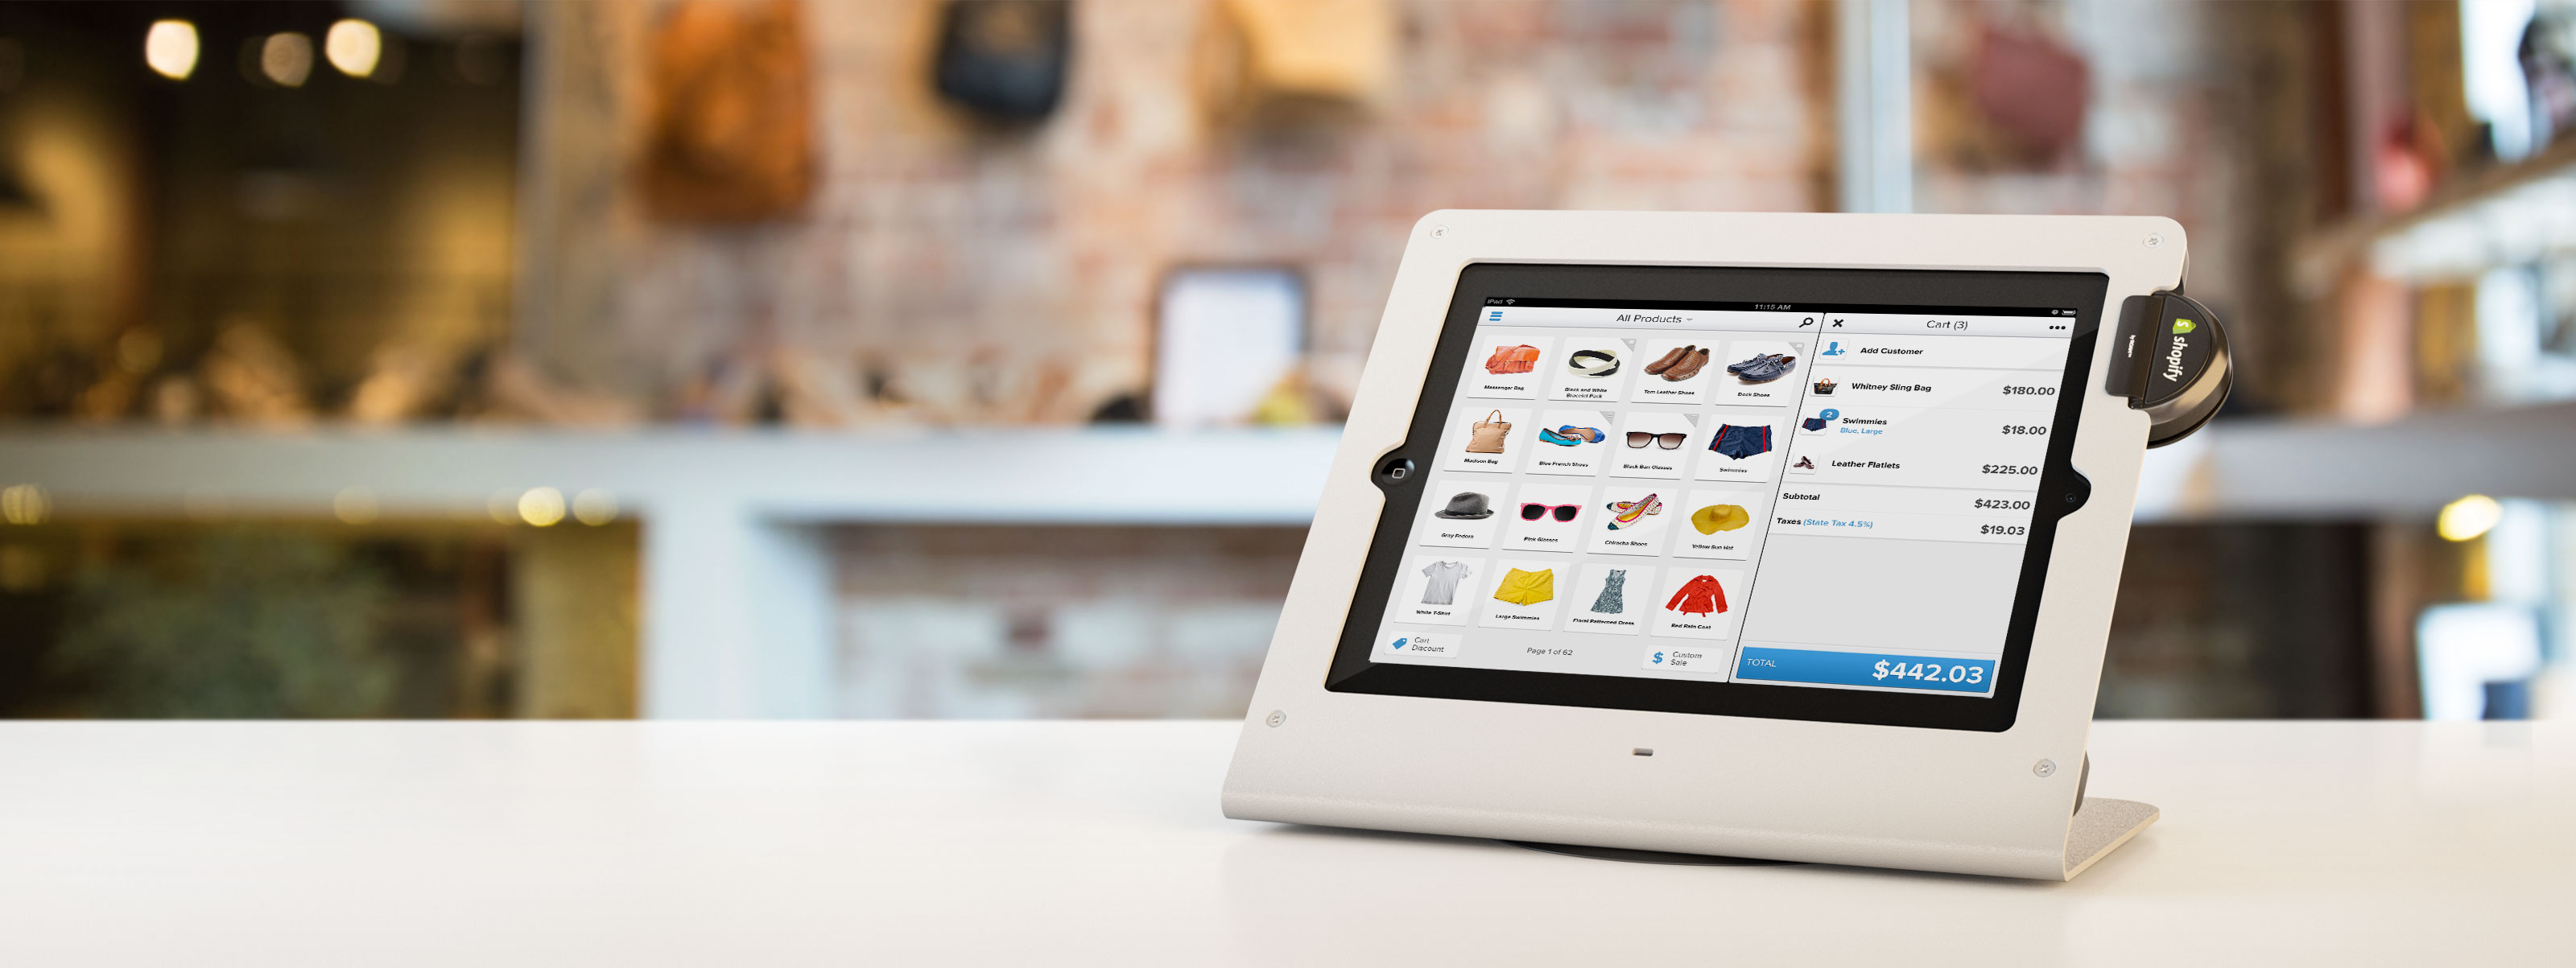 Shopify Takes on Square with its Own iPad-Based POS System